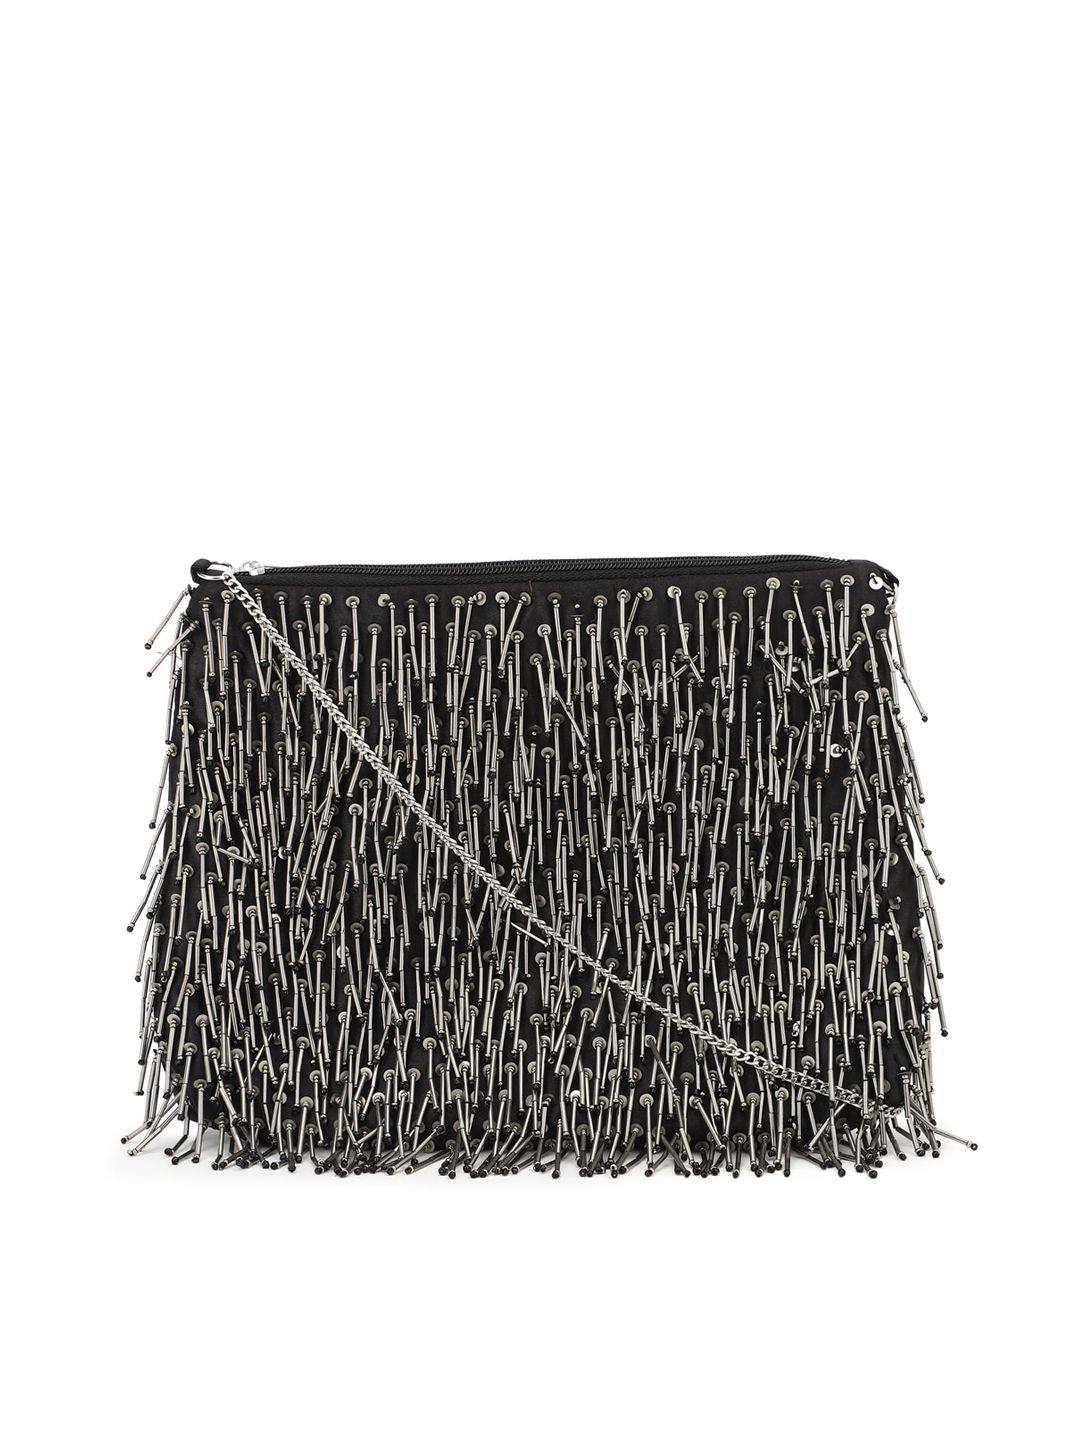 FOREVER 21 Women Grey Embellished Structured Sling Bag with Fringed Price in India